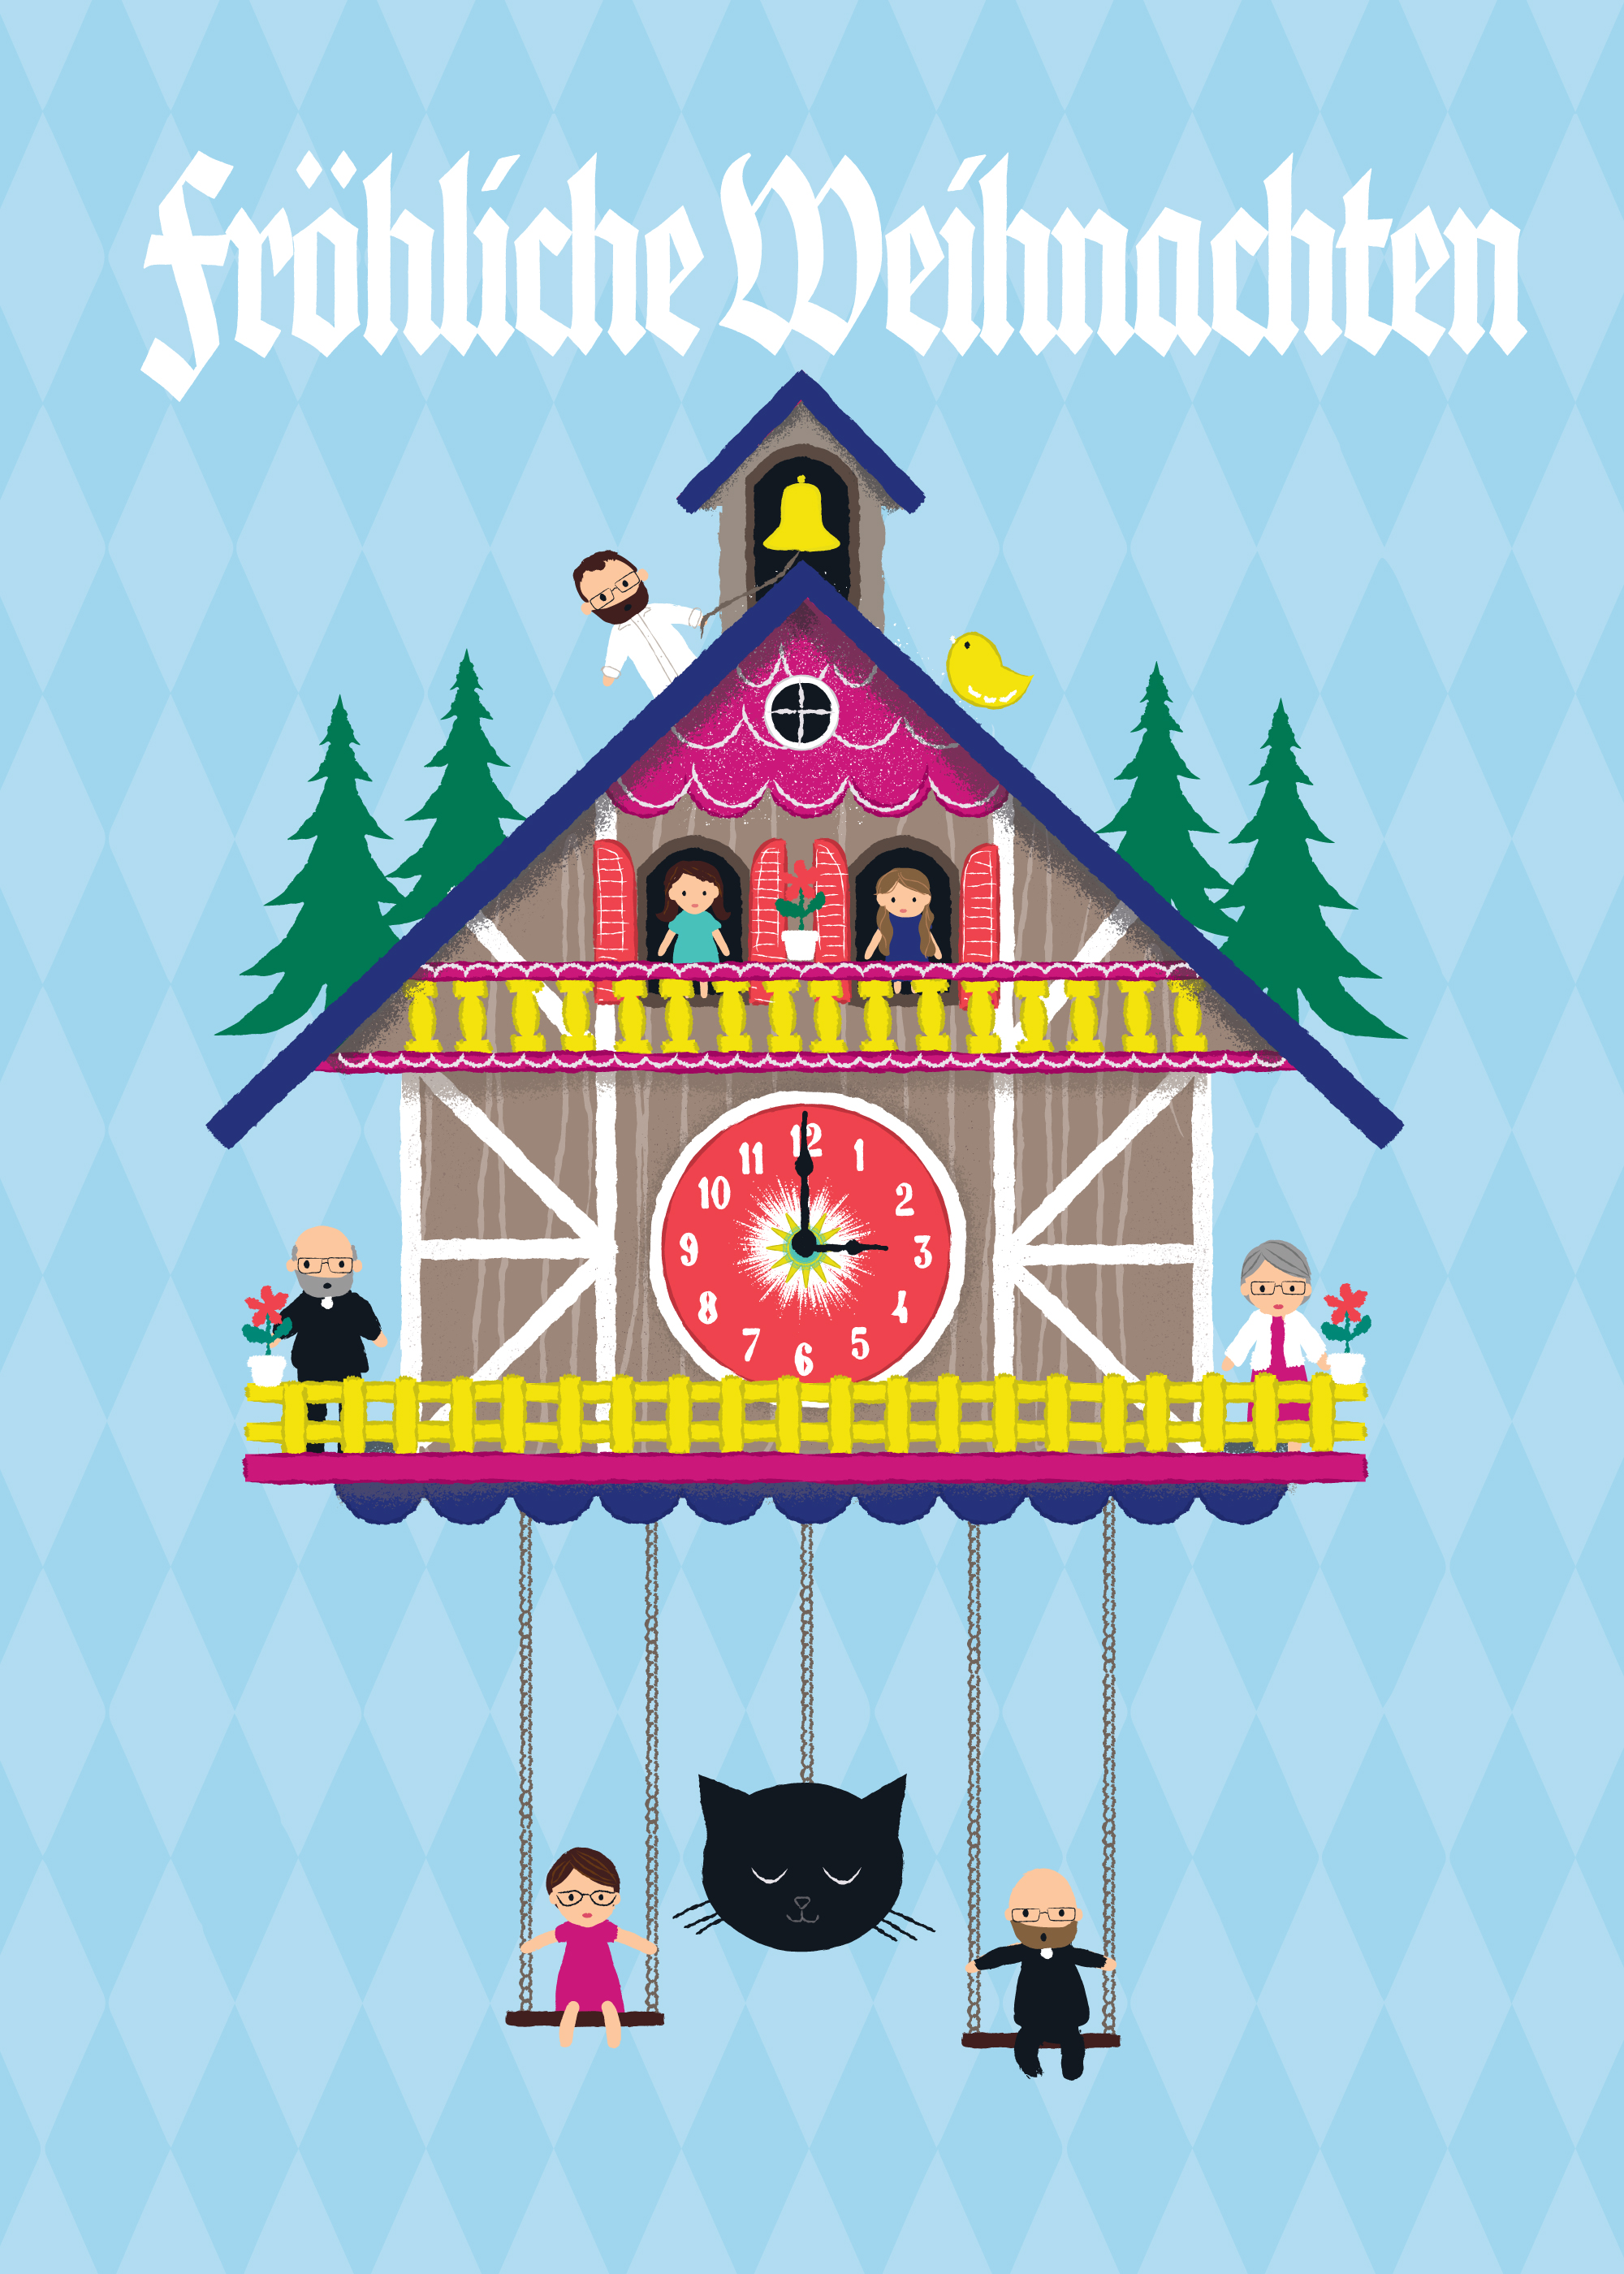 picture of cuckoo clock